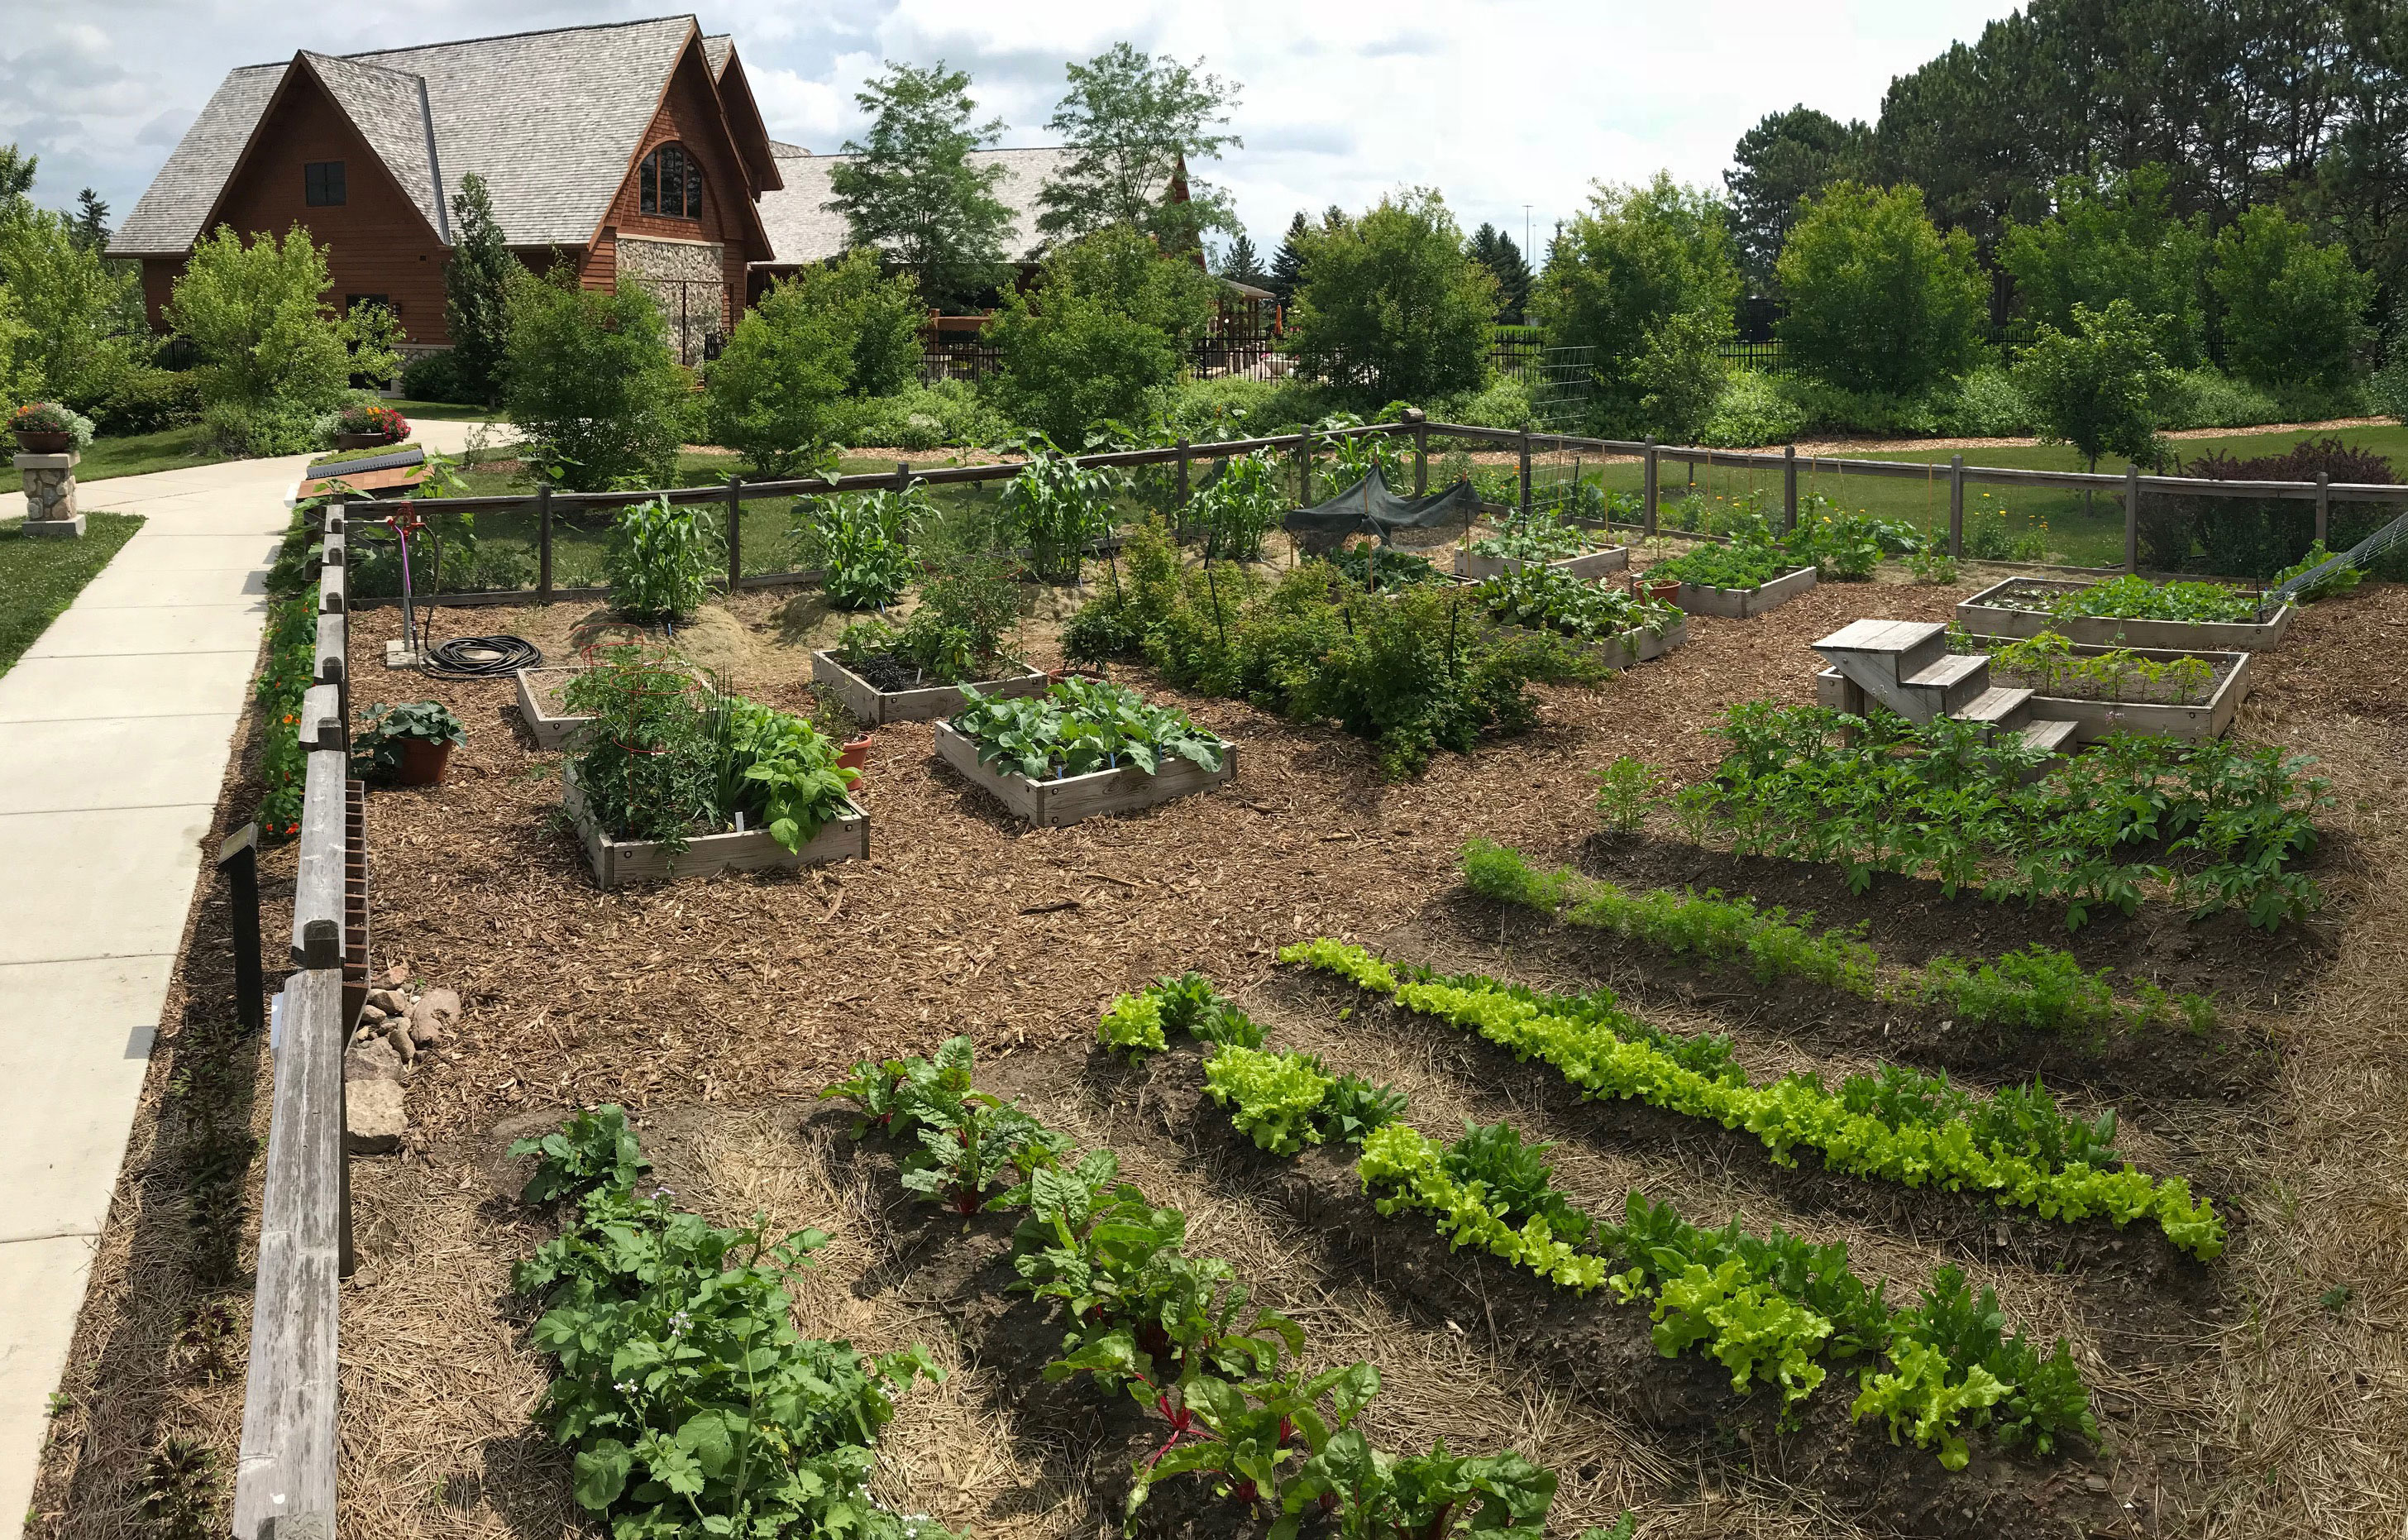 A group of raised ground beds with crops growing in them at McCrory Gardens in Brookings, South Dakota.